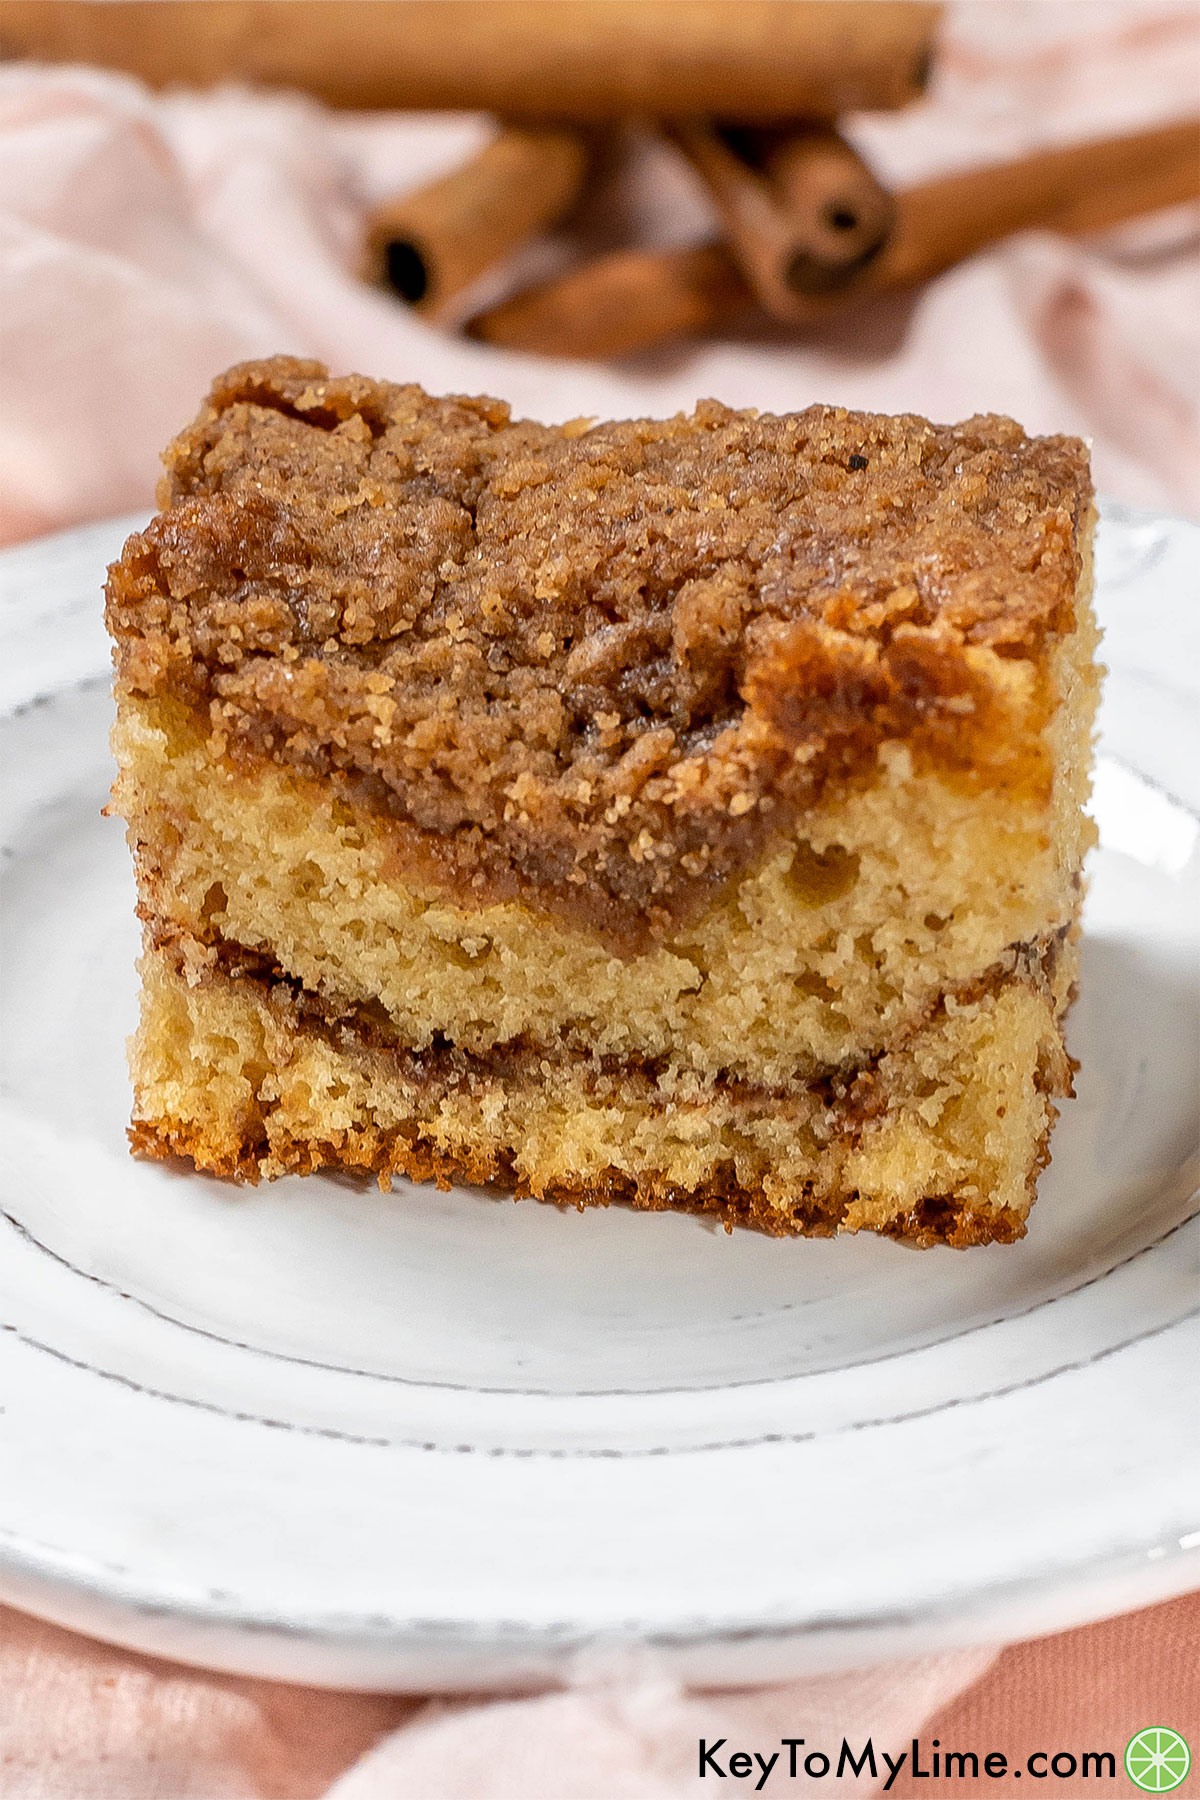 A close up image of a slice of coffee cake served on a white plate with cinnamon sticks in the background.